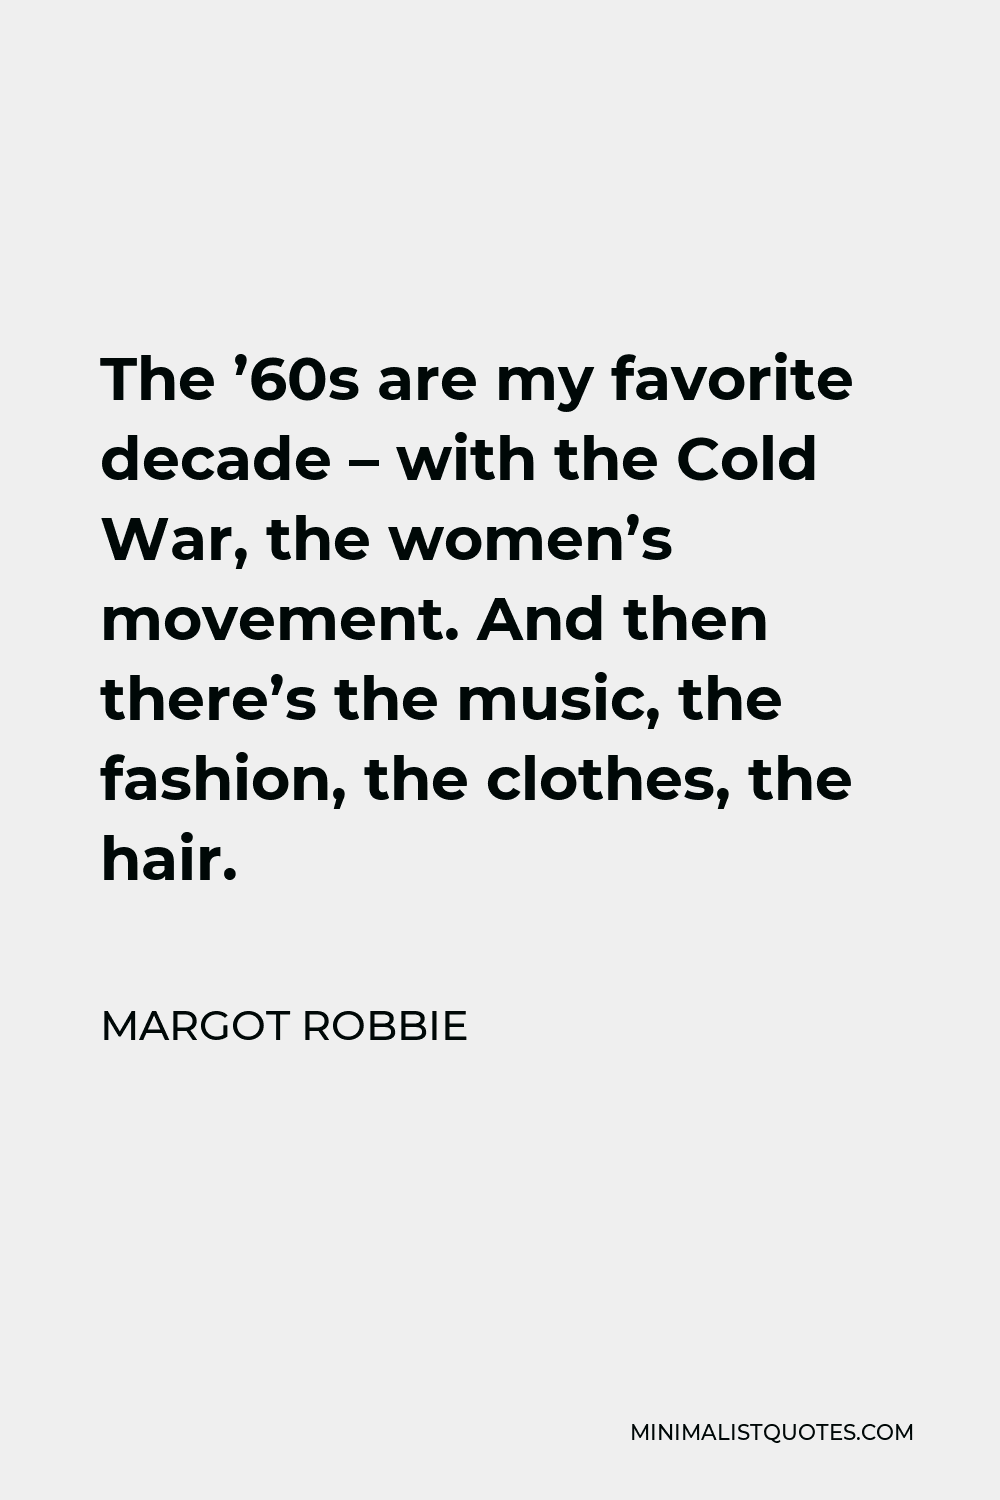 Margot Robbie Quote - The ’60s are my favorite decade – with the Cold War, the women’s movement. And then there’s the music, the fashion, the clothes, the hair.